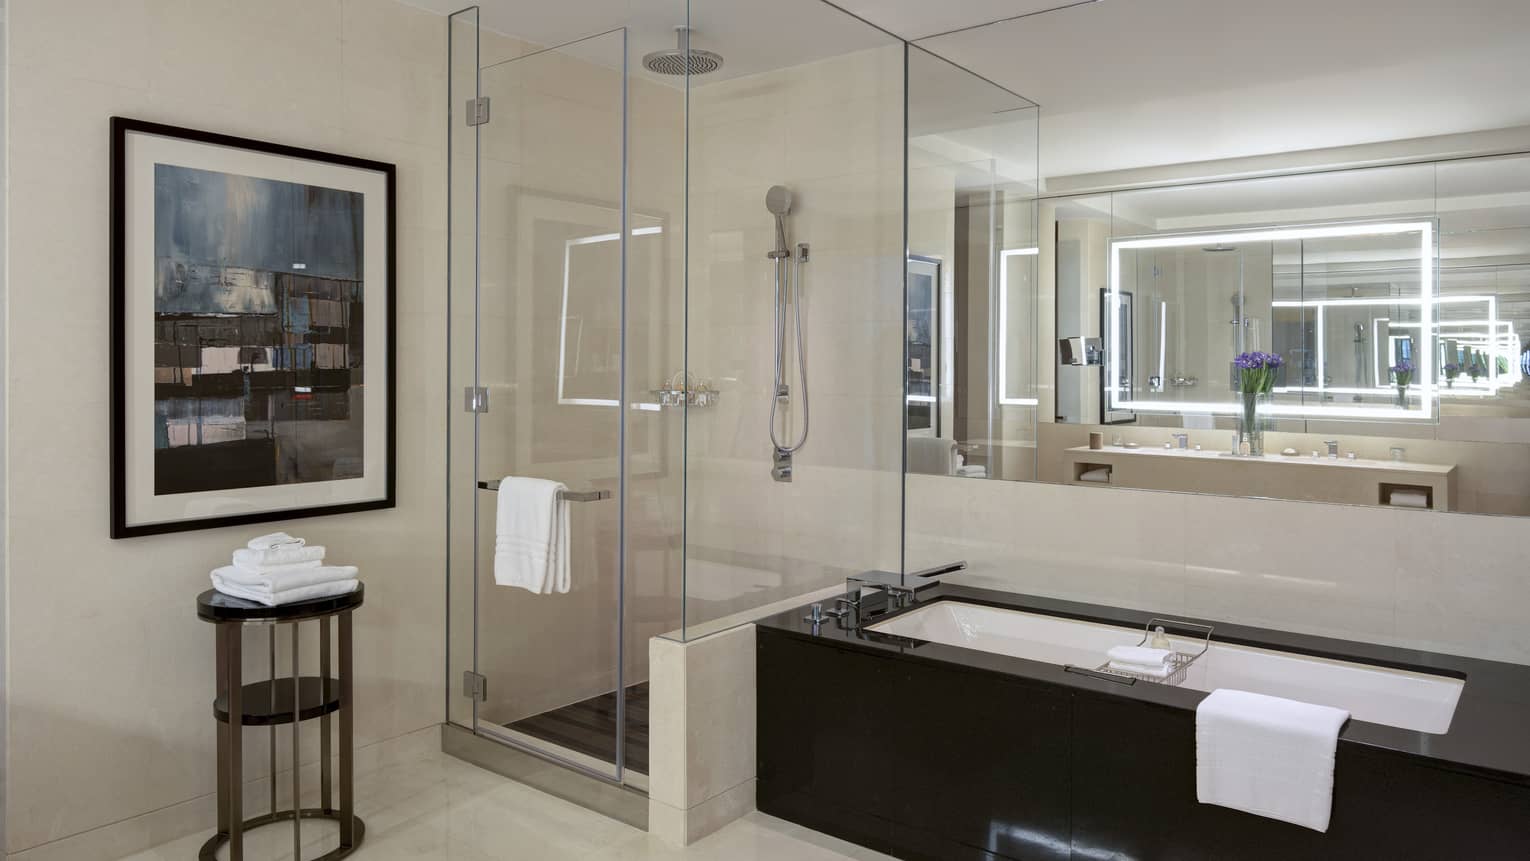 Bathroom with built-in tub, glass enclosed shower, artwork